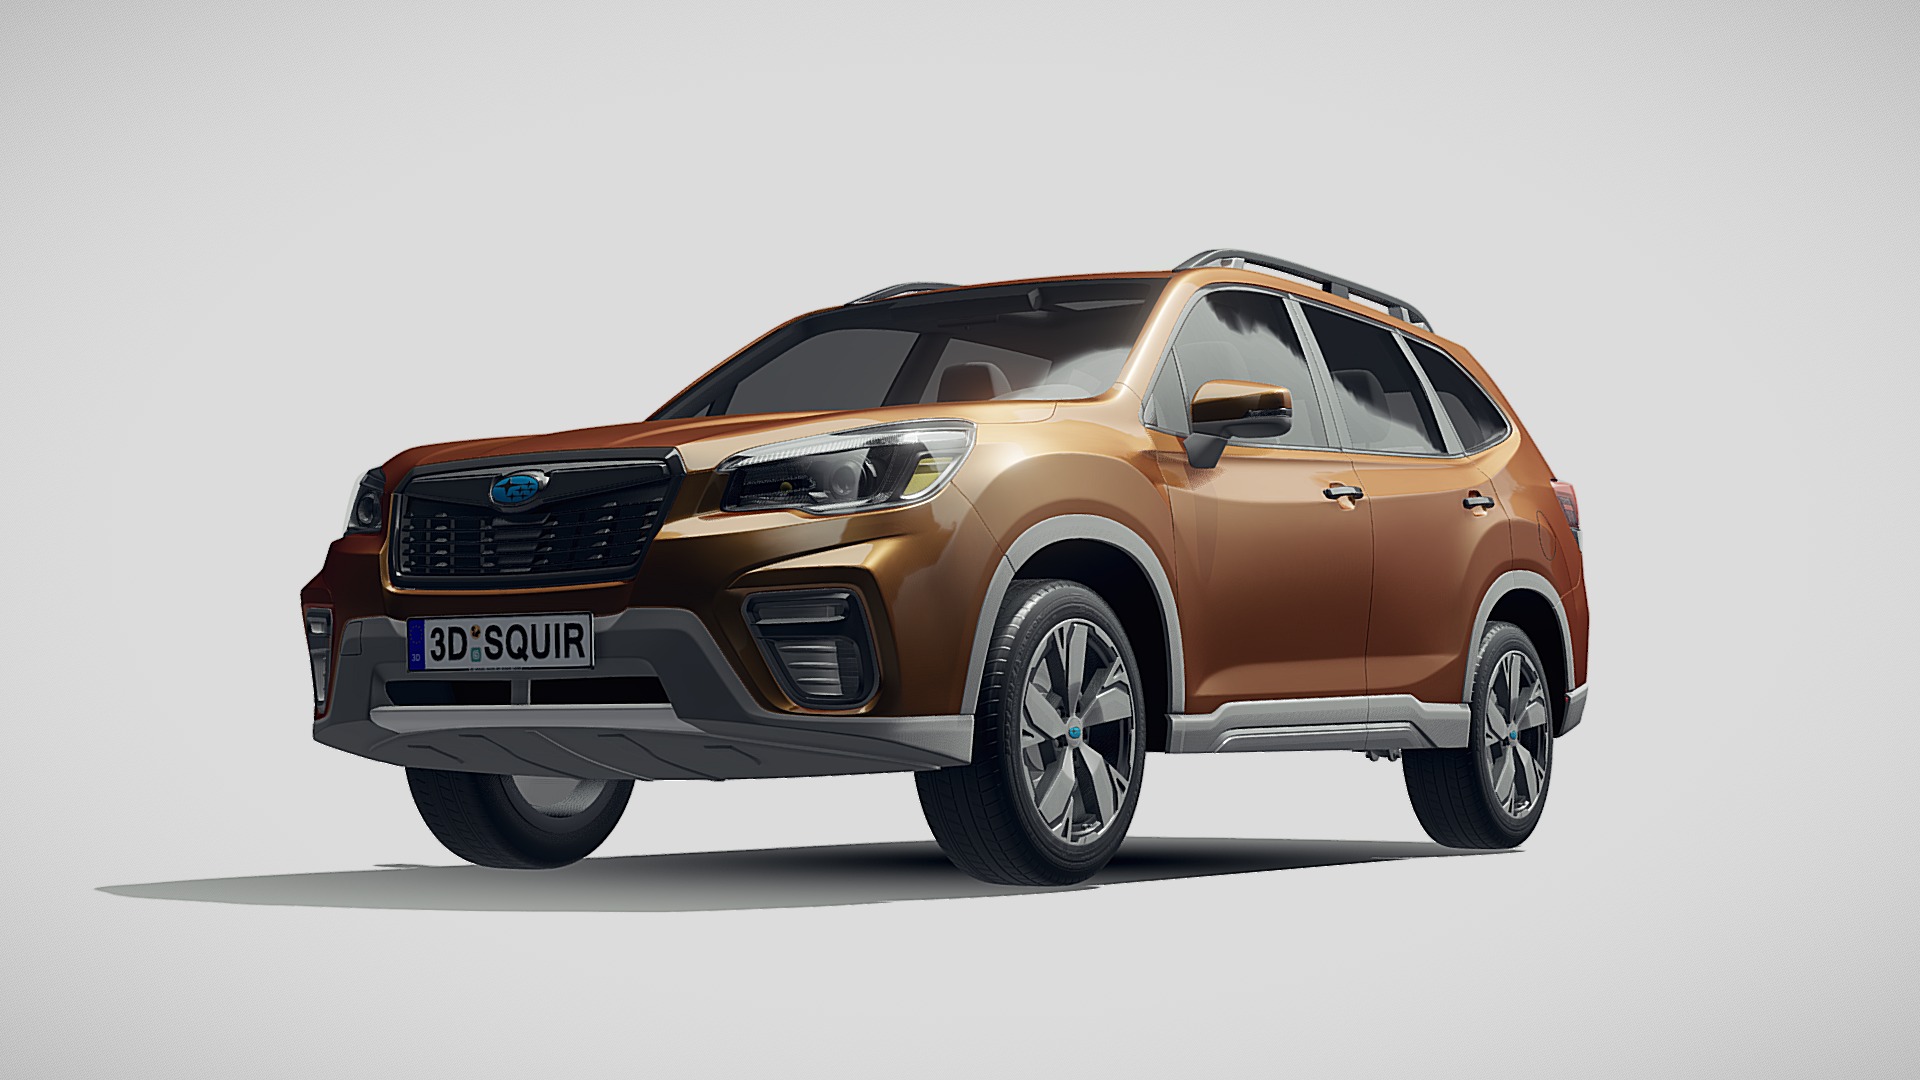 3D model Subaru Forester 2019 - This is a 3D model of the Subaru Forester 2019. The 3D model is about a car parked with its front facing the camera.